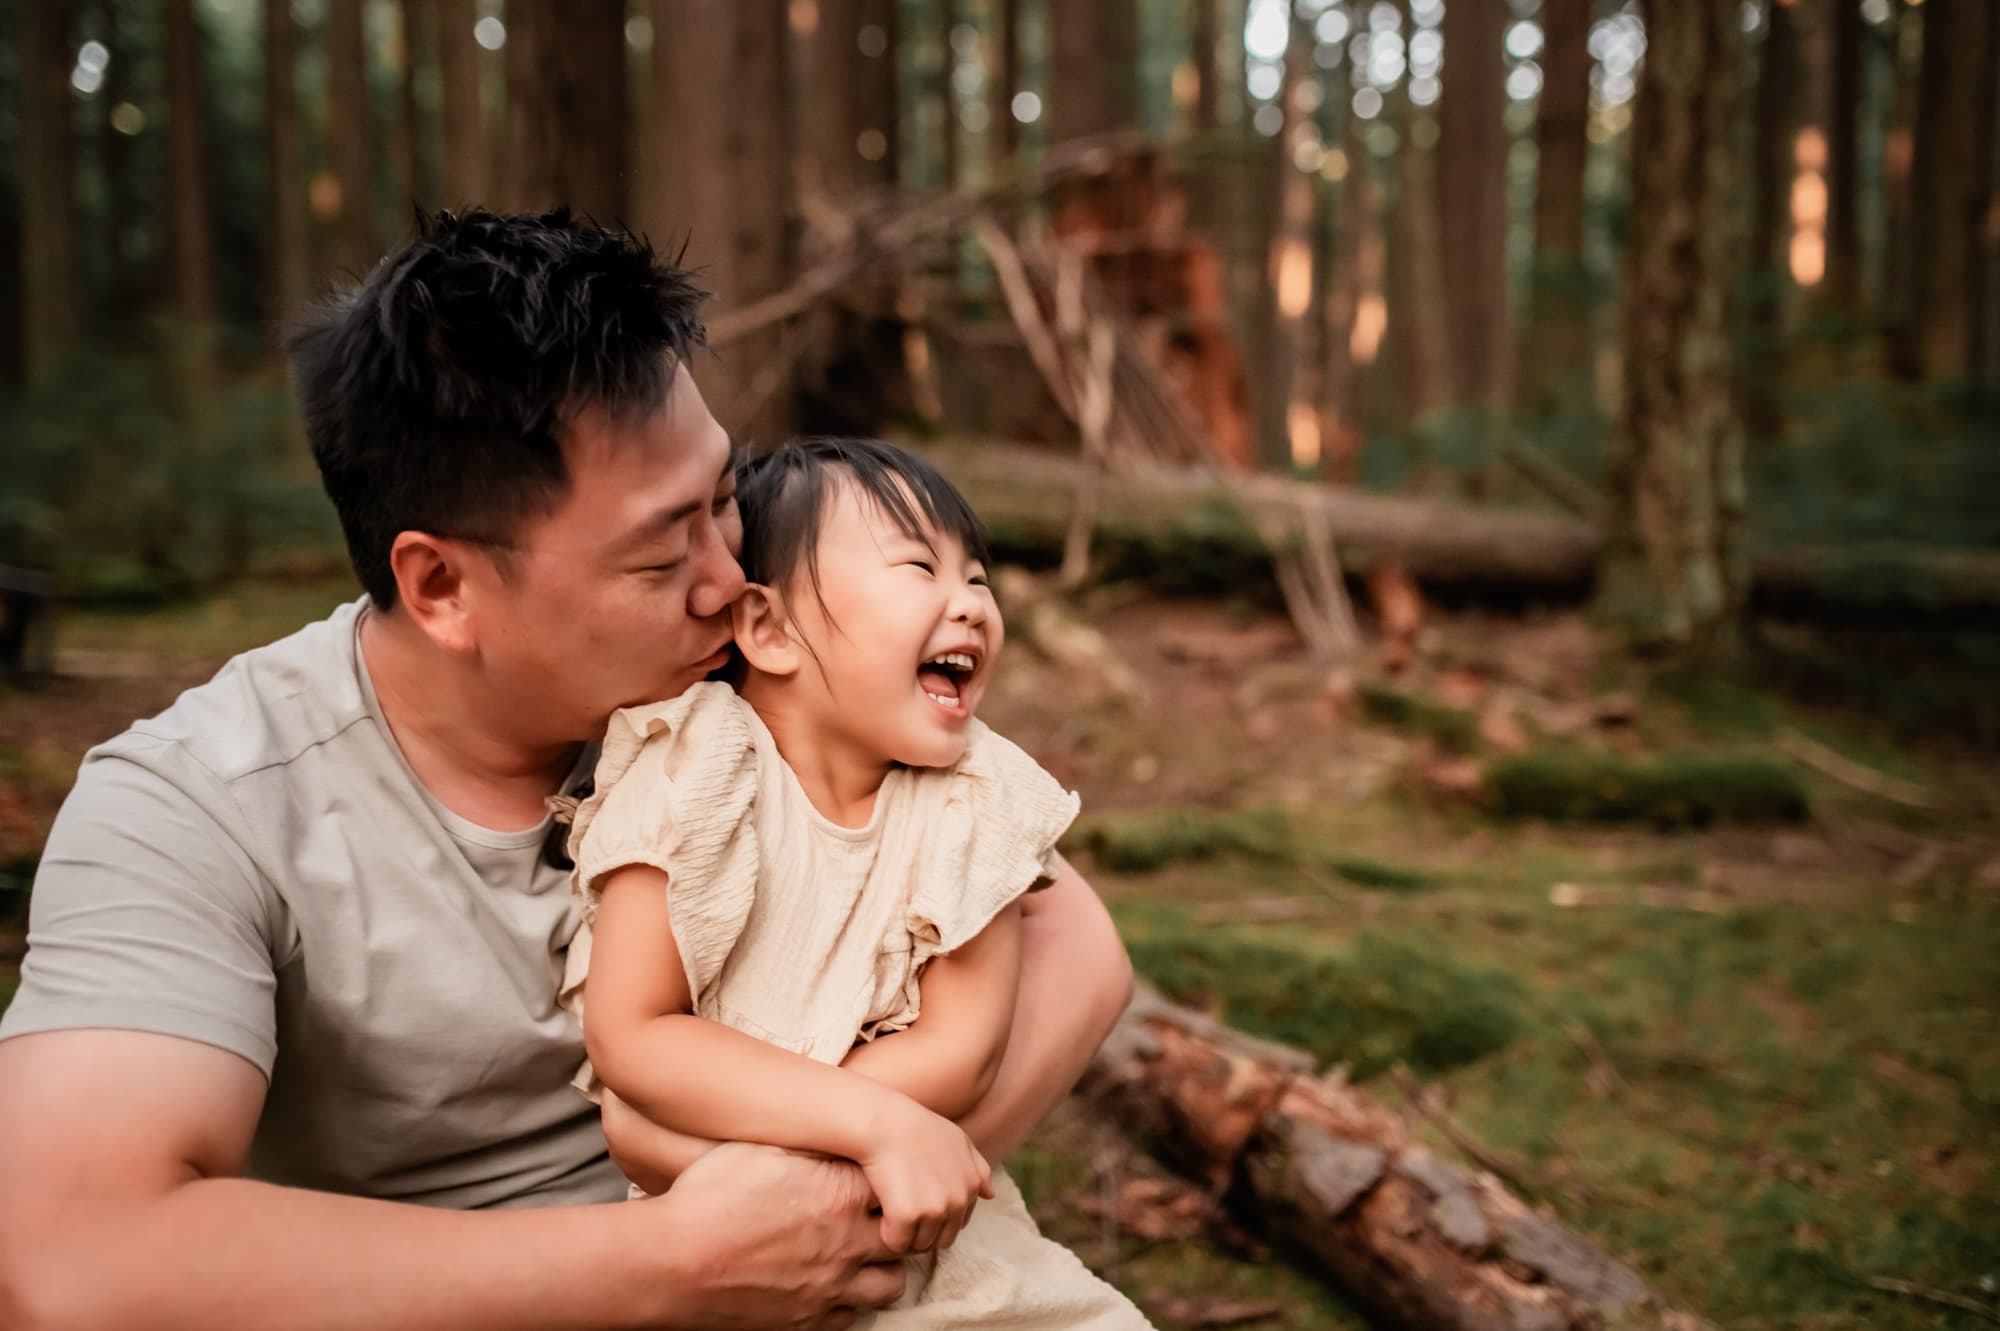 Dad and daughter laughing in the Pacific Spirit Park family photo session.